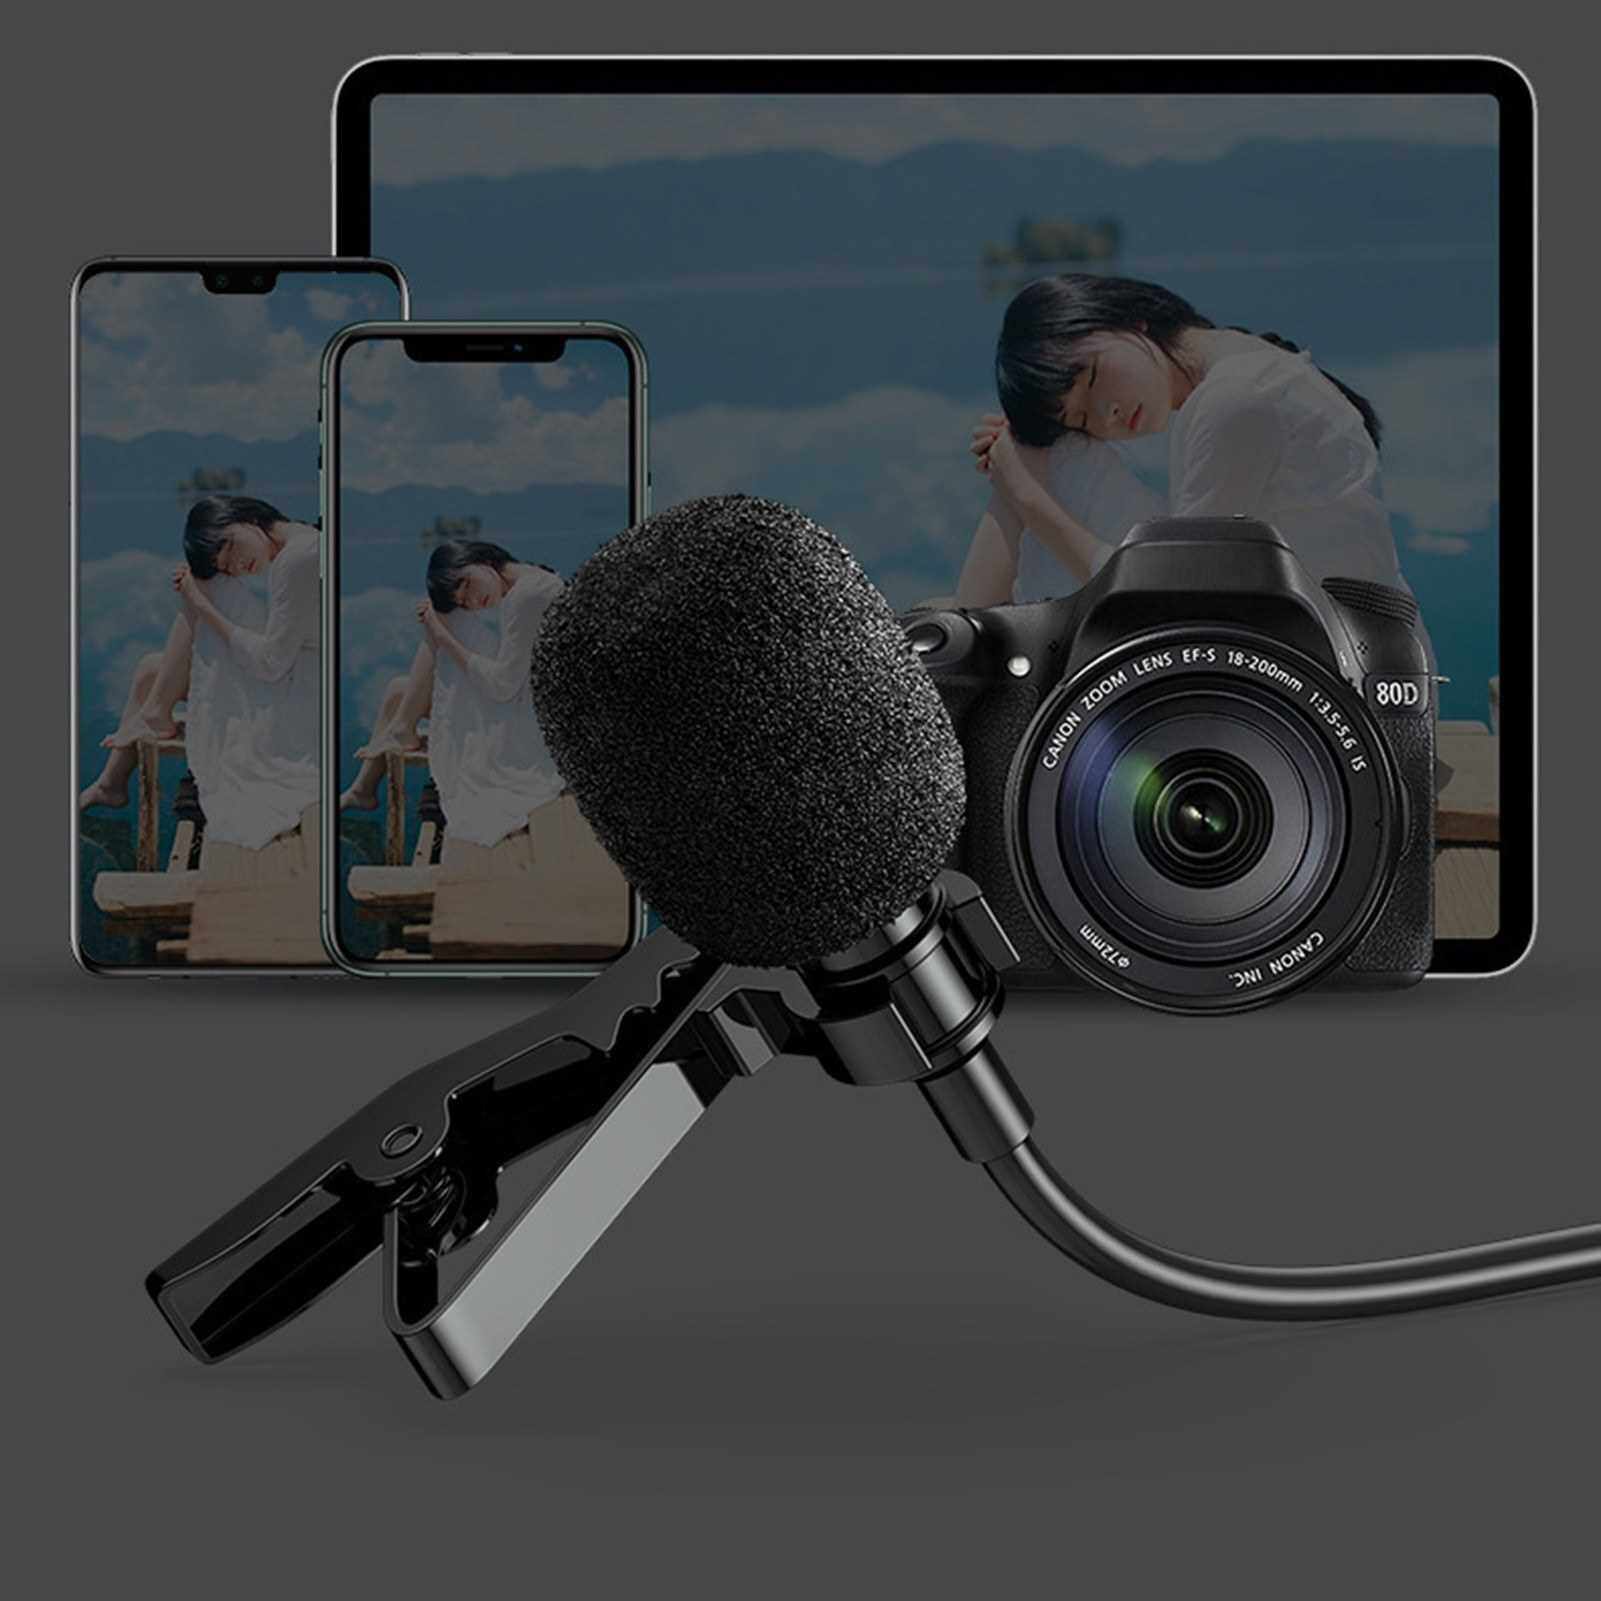 Lavalier Microphone Professional Camera Microphone Mobile Microphone for SLR Interview Conference Recording Video Blog Omnidirectional Lapel Microphone with 2m Audio Extension Cable and 3.5mm Adaptor (Standard)